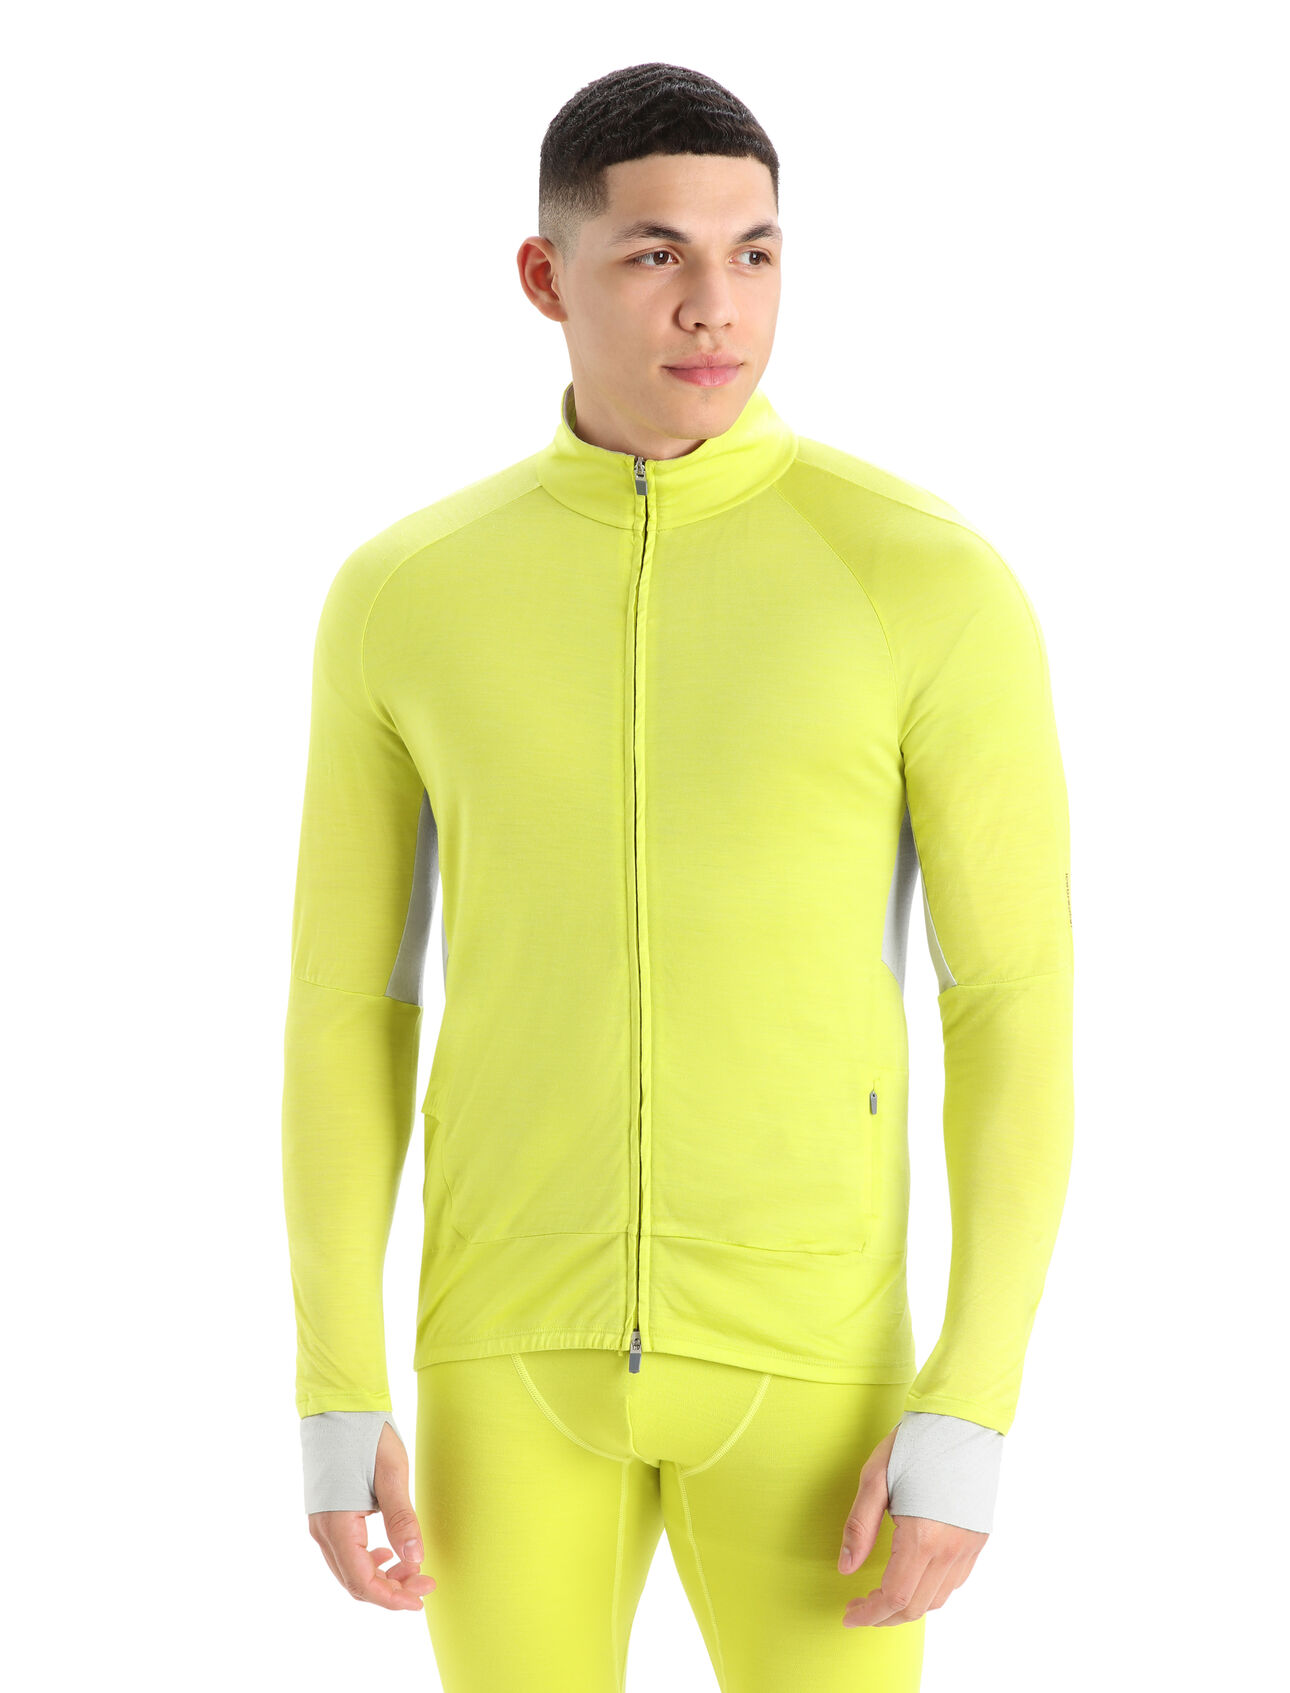 Mens ZoneKnit™ Merino Long Sleeve Zip A lightweight midlayer designed to balance warmth and breathability while running, biking or moving fast in the mountains, the ZoneKnit™ Long Sleeve Zip combines our Cool-Lite™ jersey fabric with strategic panels of eyelet mesh for enhanced airflow.